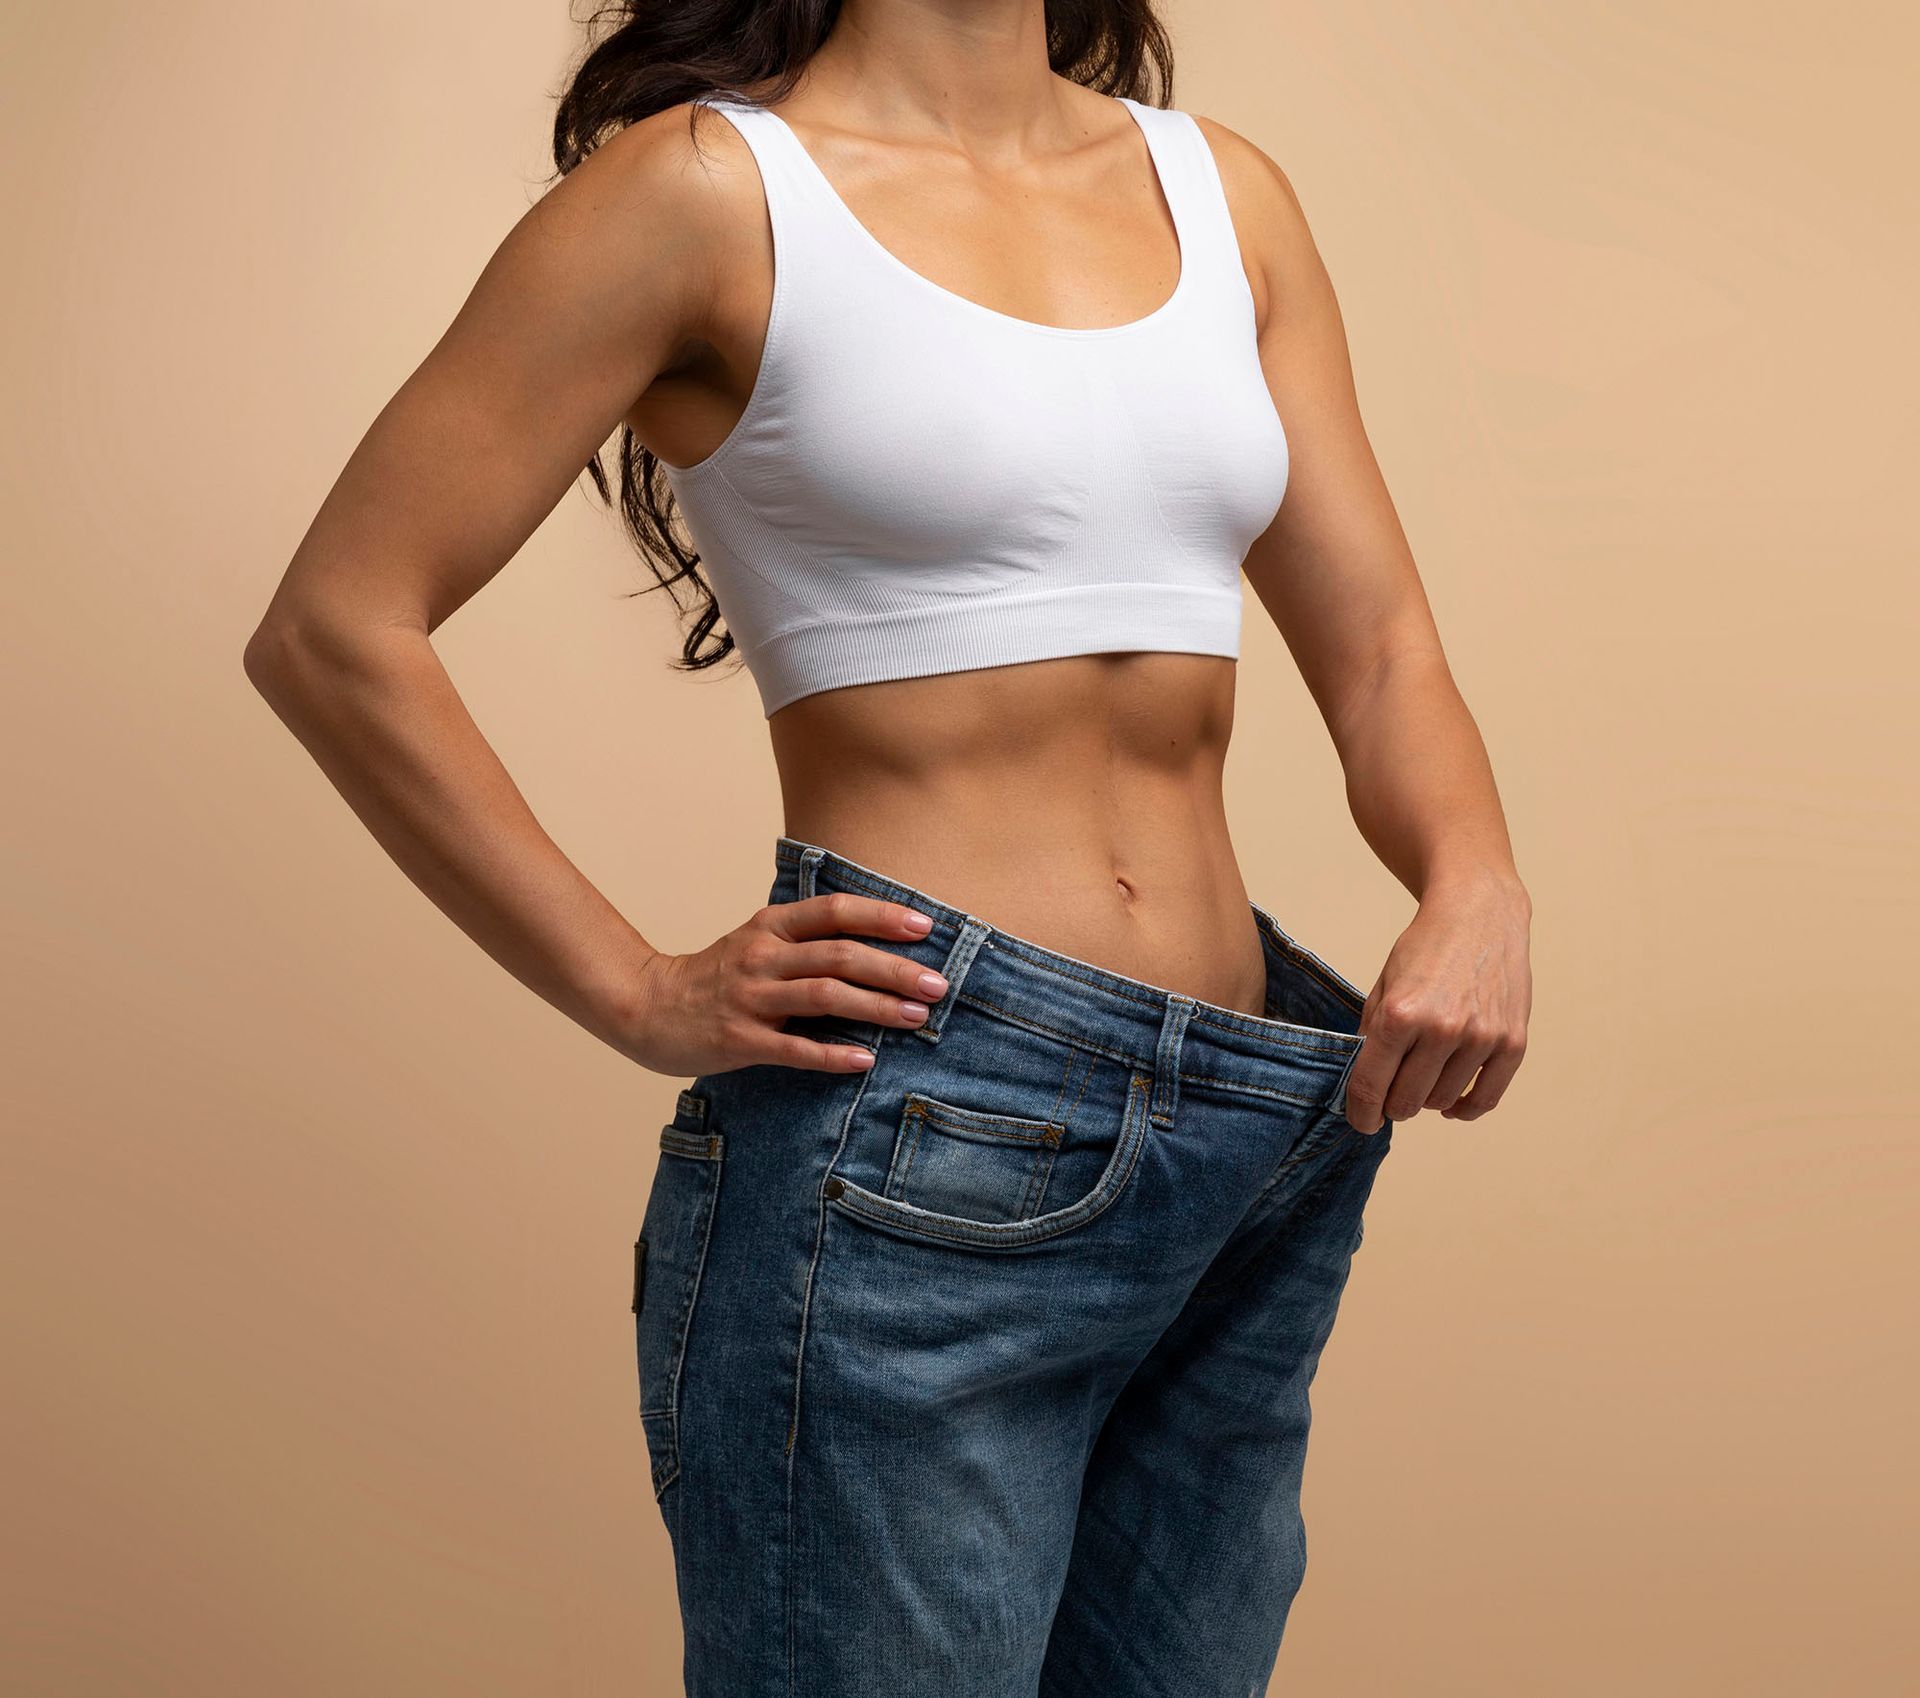 A woman in a white crop top and jeans is standing with her hands on her hips.